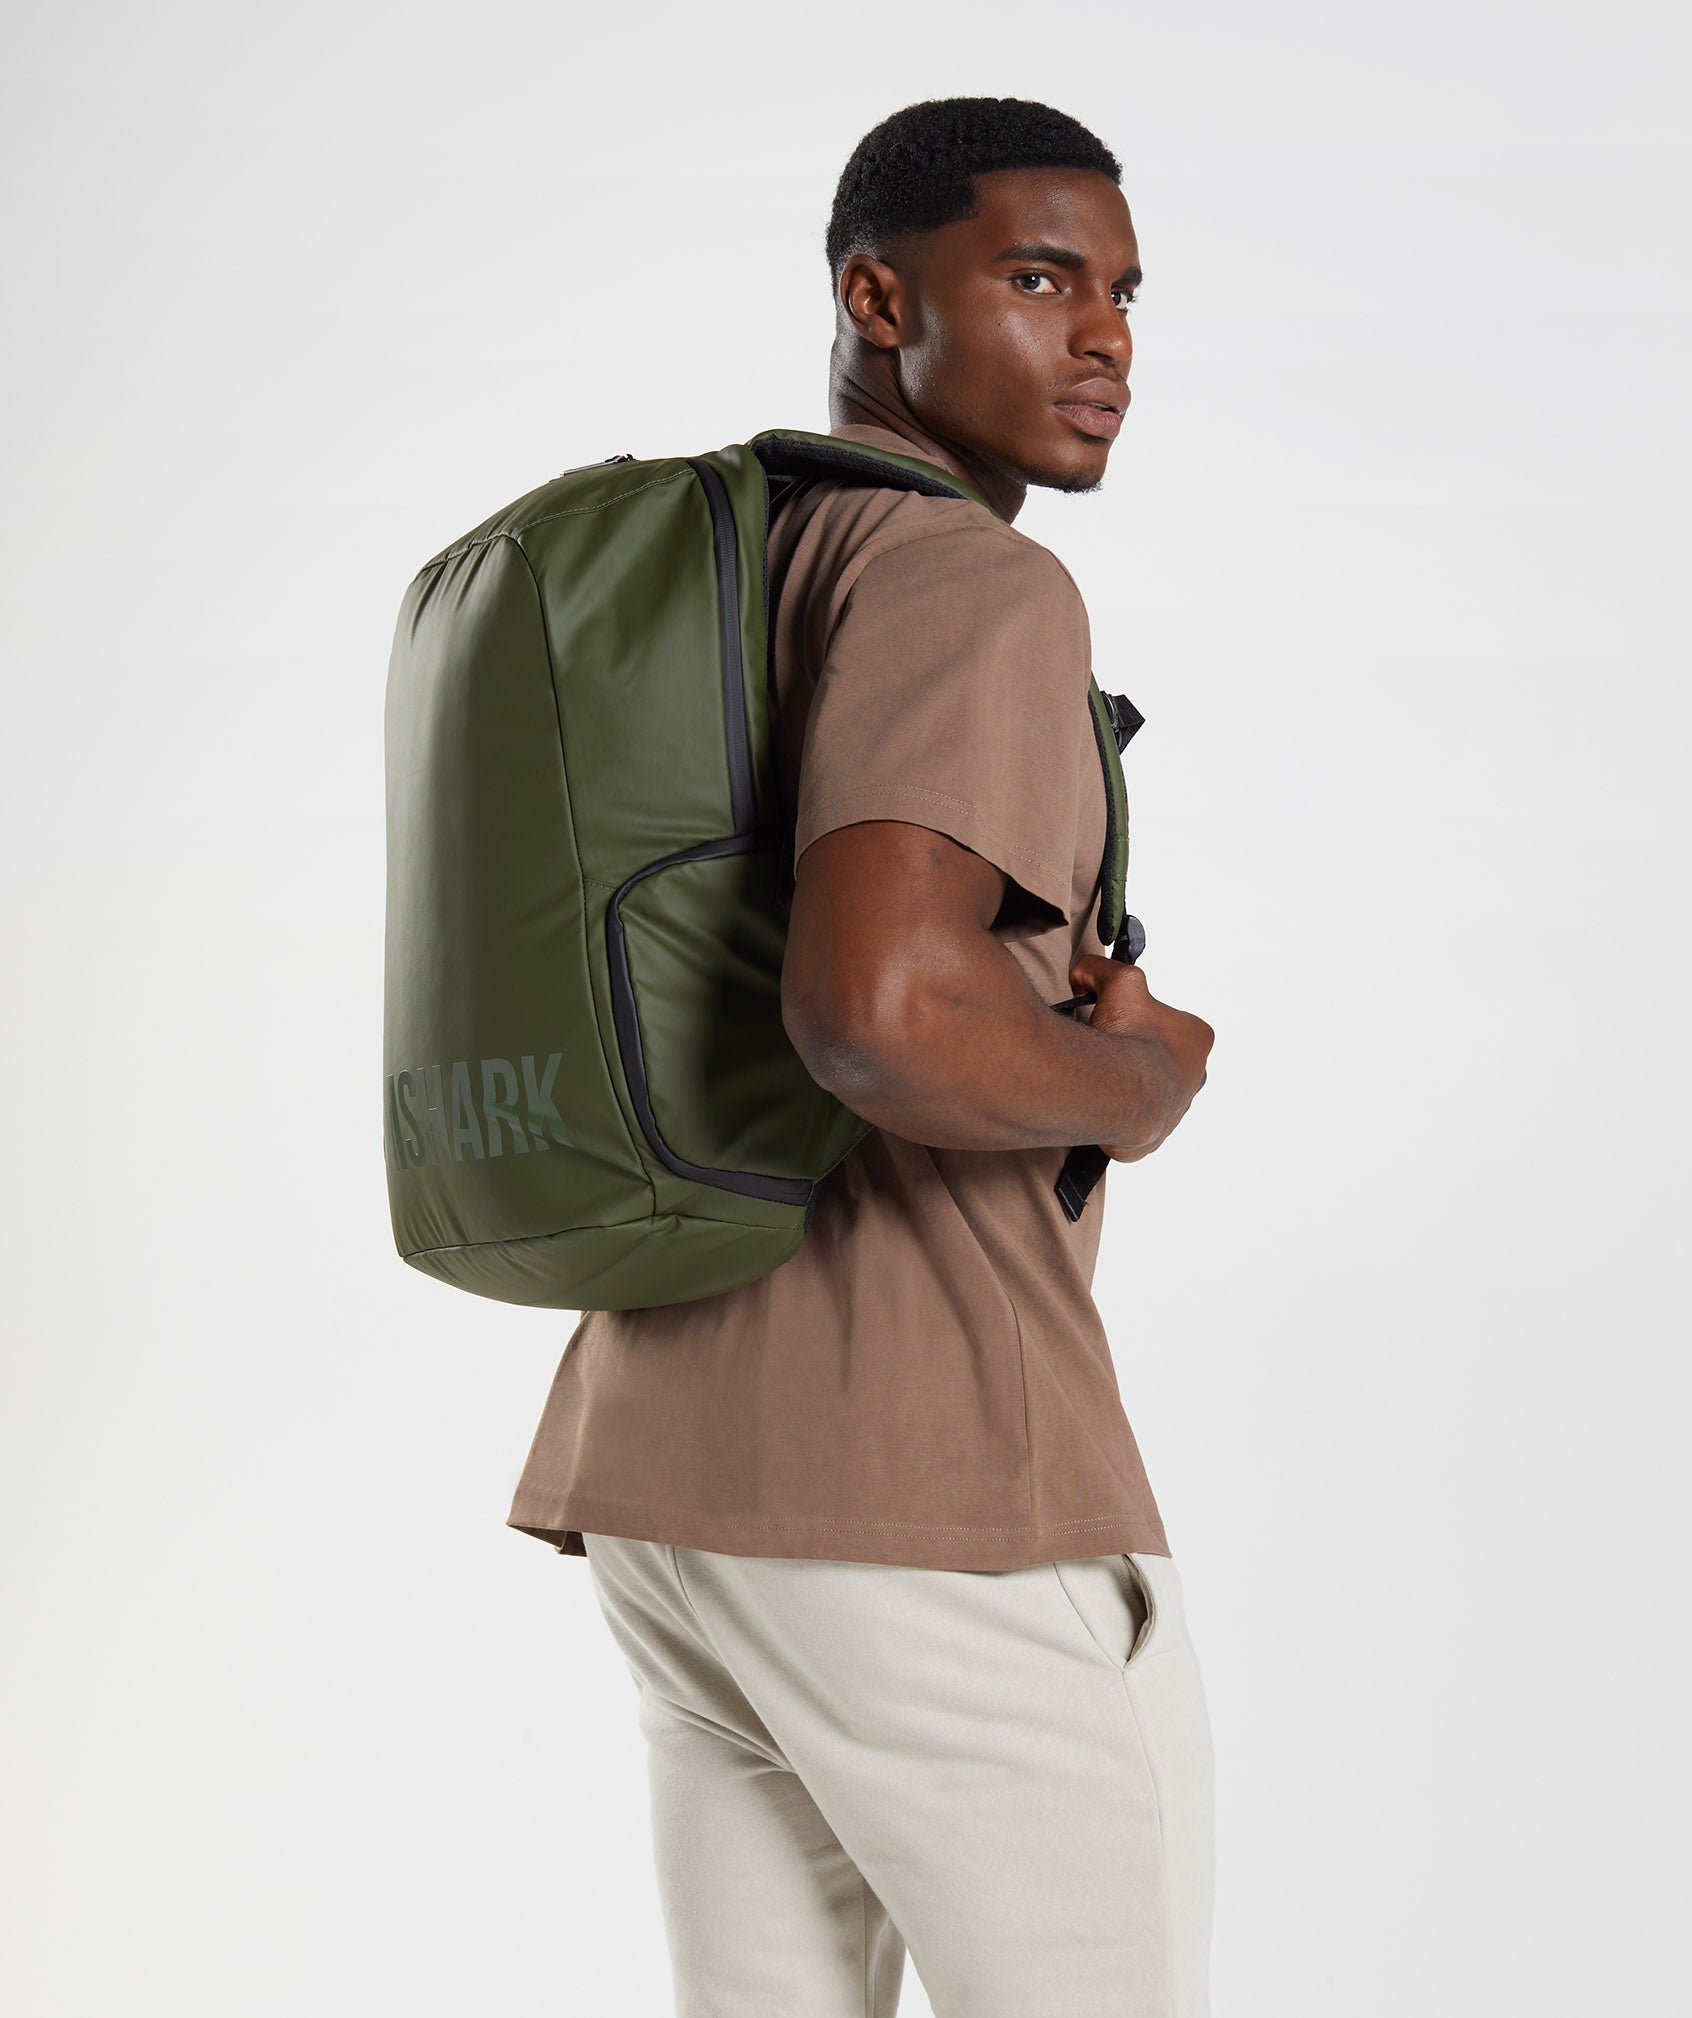 X-Series Bag 0.1 in Core Olive - view 2